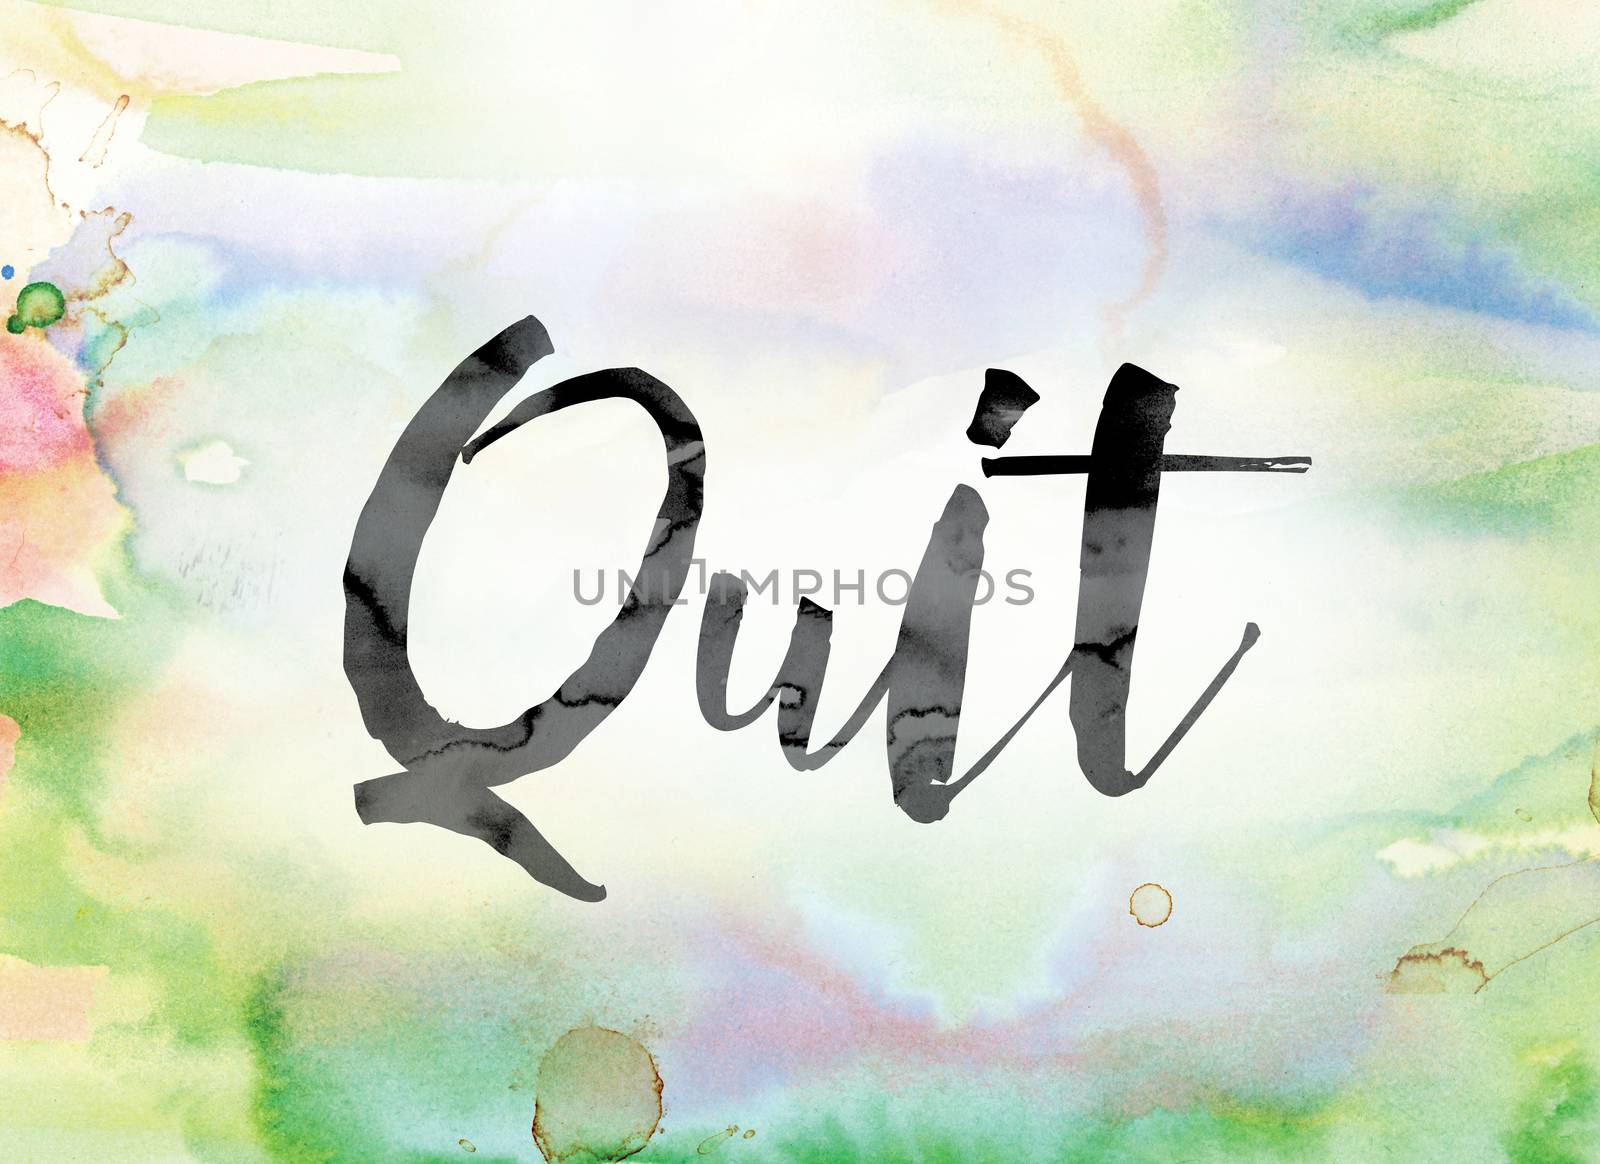 The word "Quit" painted in black ink over a colorful watercolor washed background concept and theme.